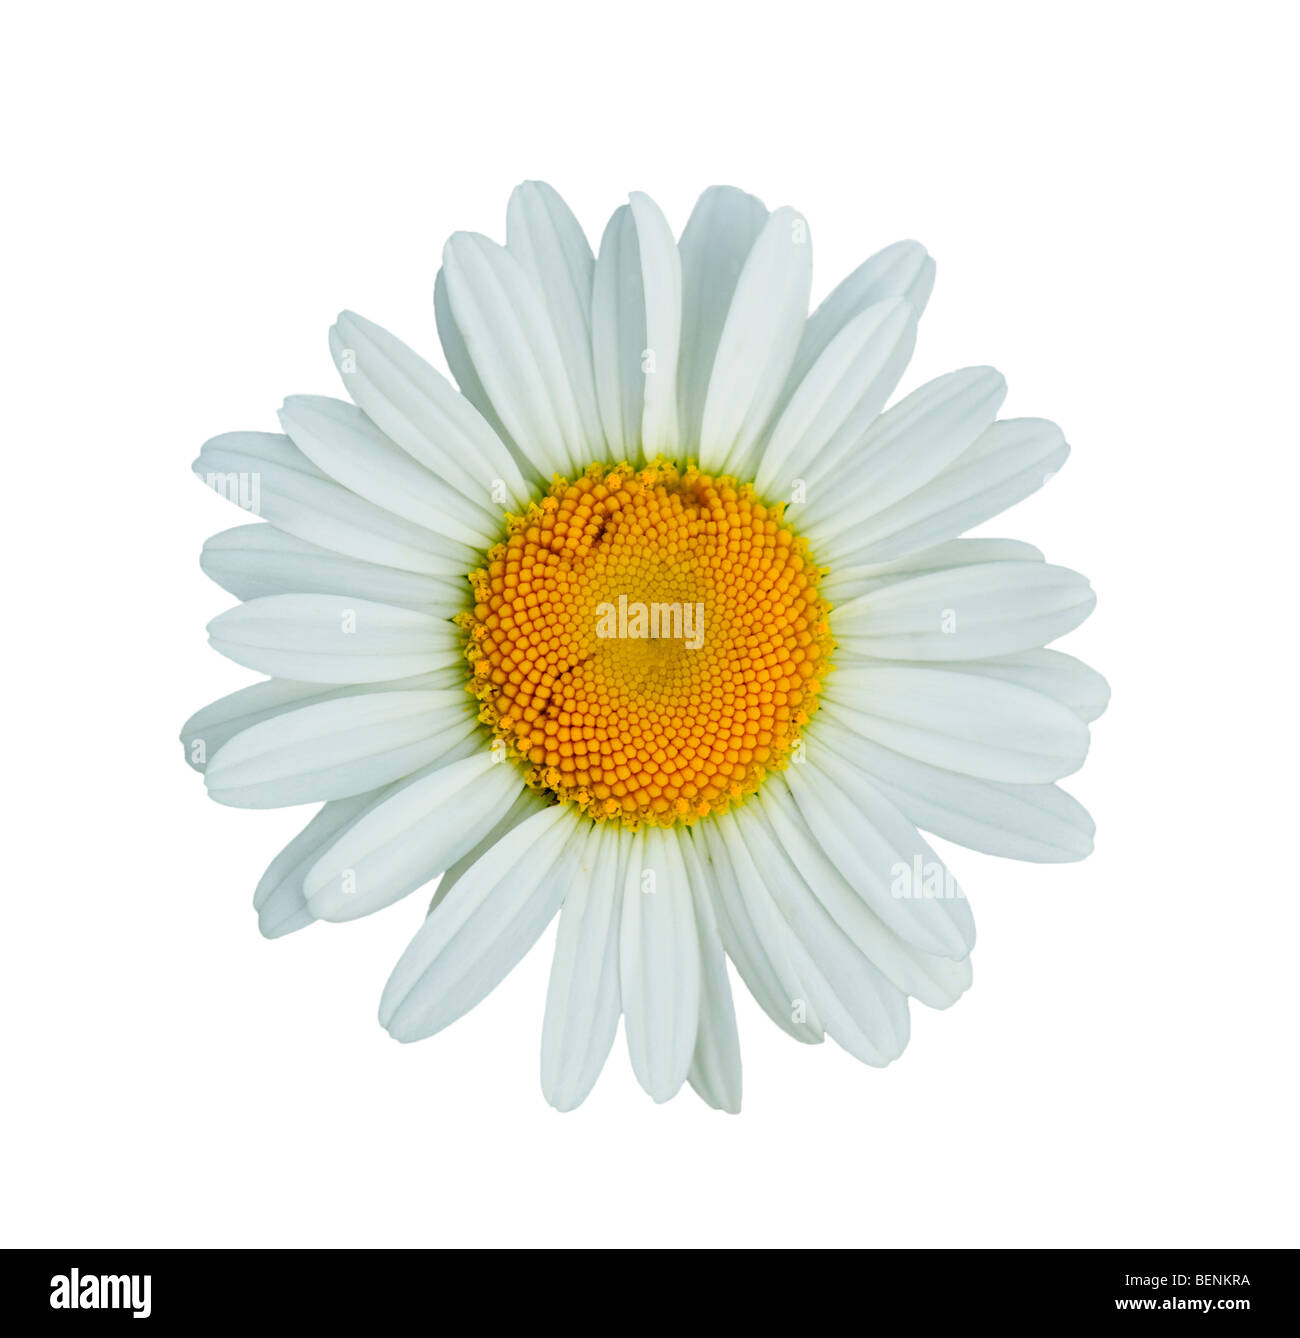 Daisy flower isolated on white Banque D'Images